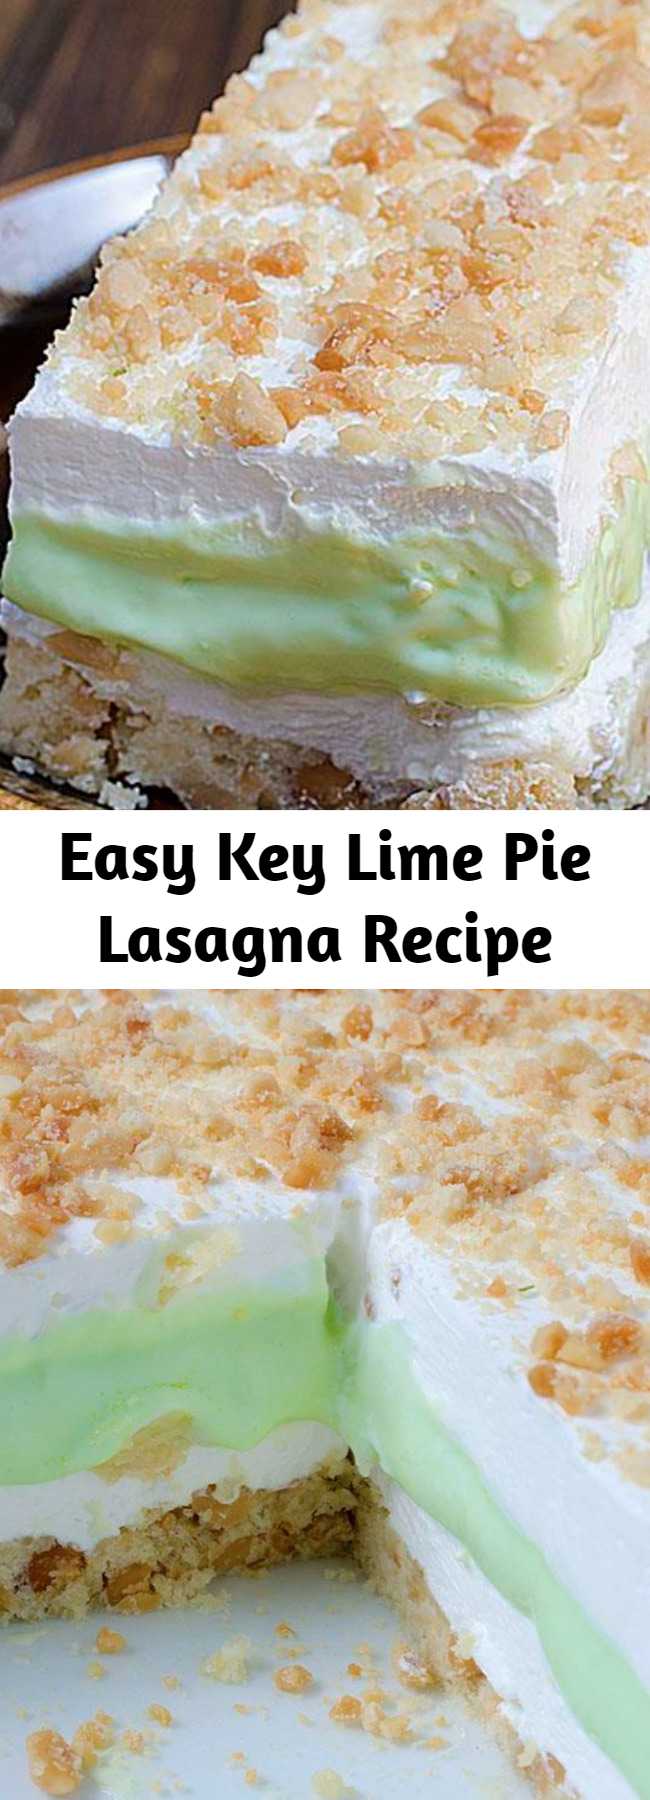 Easy Key Lime Pie Lasagna Recipe - Key Lime Pie Lasagna is cool, light and creamy summer dessert with sweet and tart layers of yumminess.